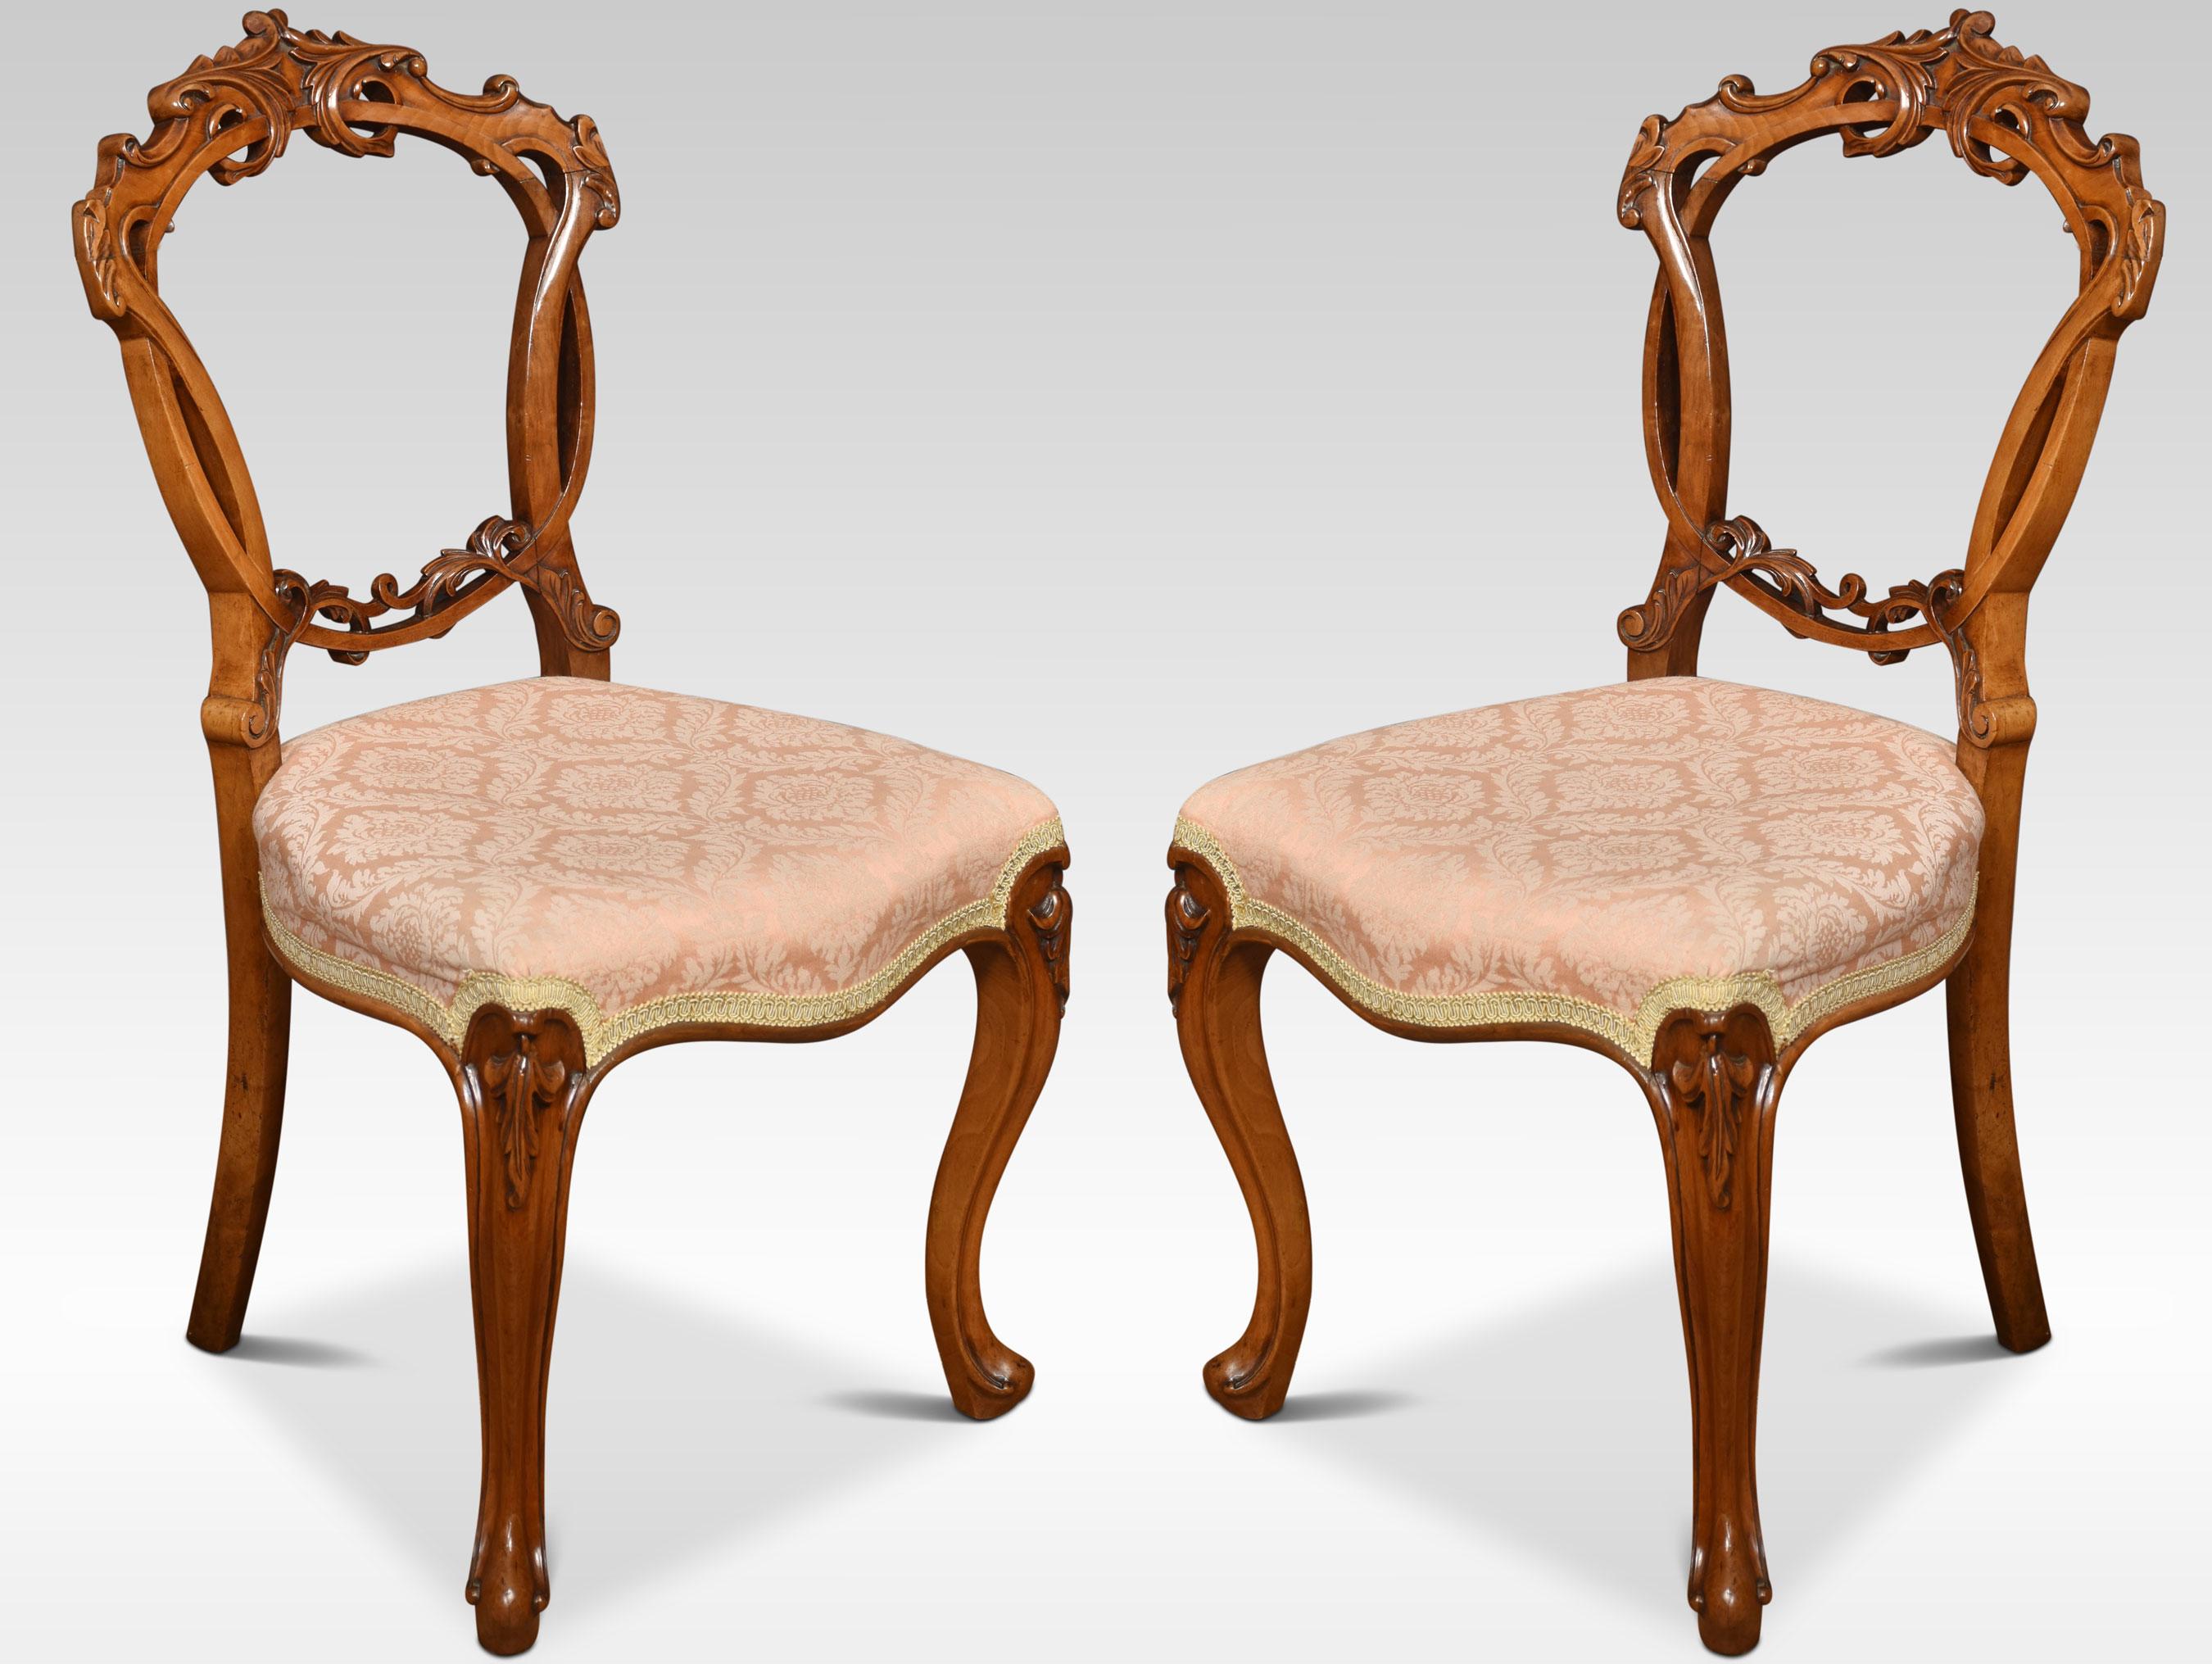 Set of four walnut balloon back dining chairs, each chair with an openwork ring back interlaced with carved scrolling foliate detail, above the overstuffed serpentine seat, raised up on cabriole front legs.
Dimensions
Height 35 inches height to